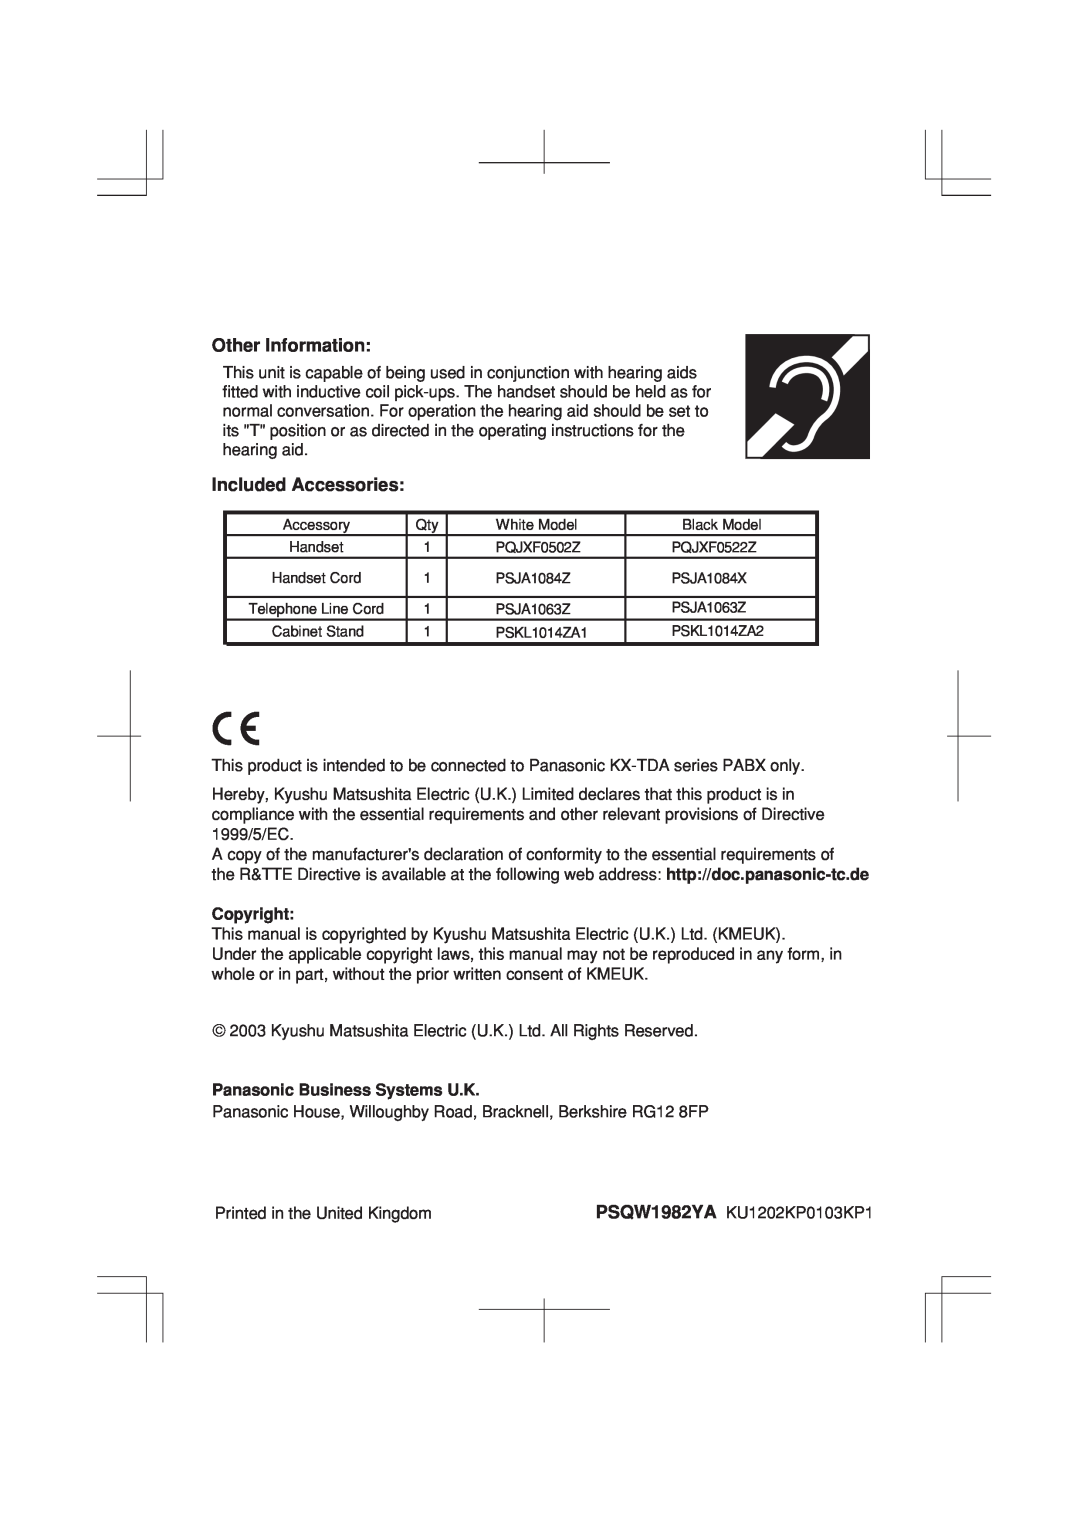 Panasonic KX-T7625E, KX-T7633E manual Other Information, Included Accessories, Copyright, Panasonic Business Systems U.K 